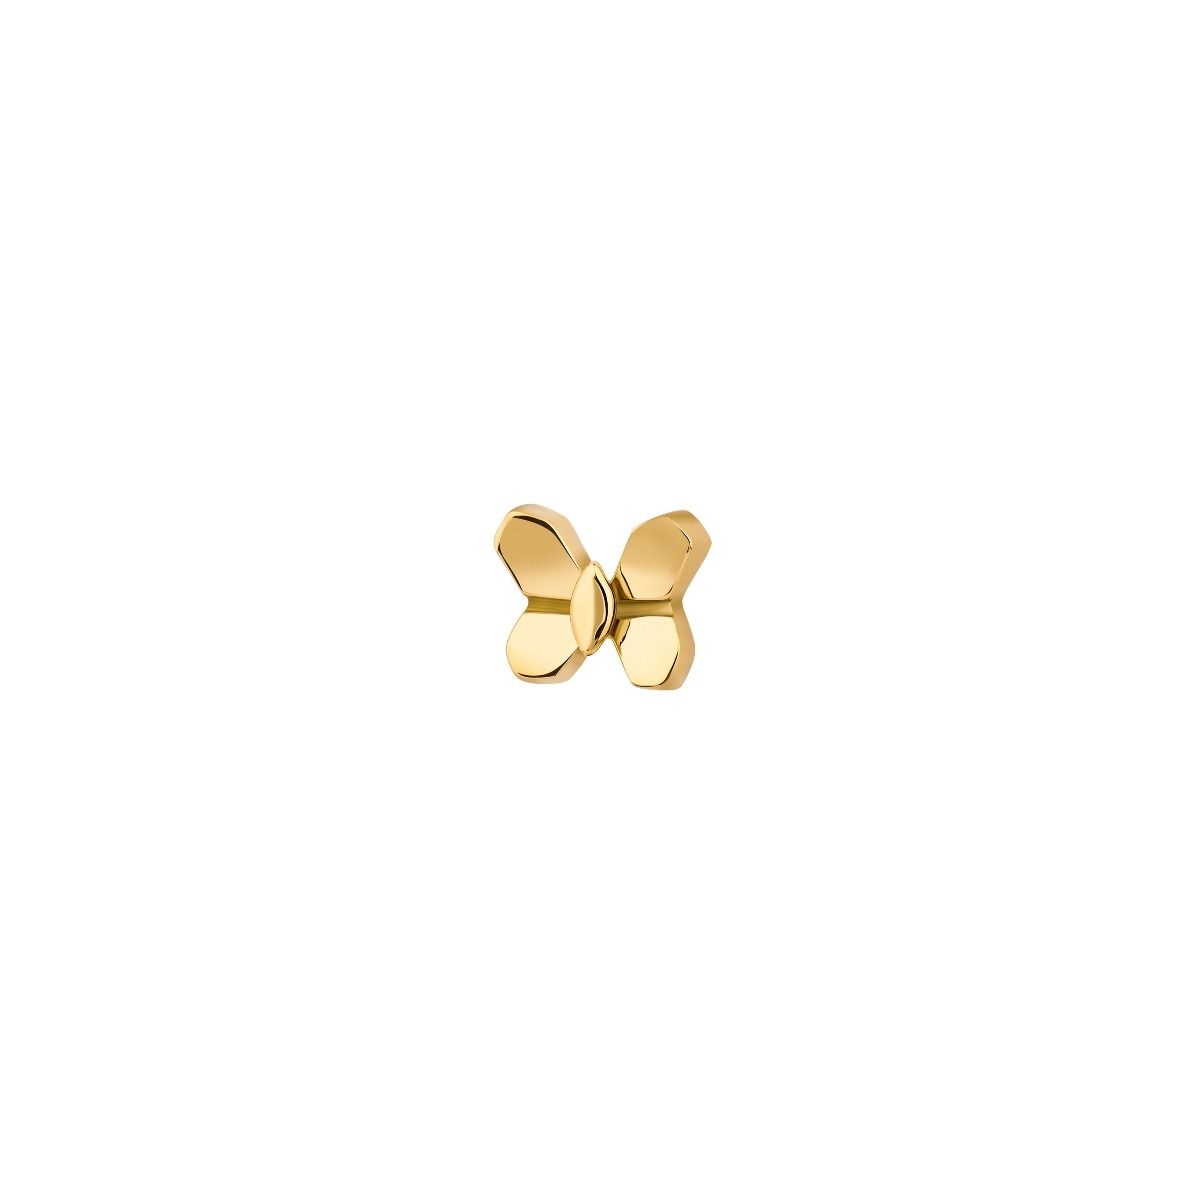 The Butterfly Stud by Azza Fahmy - Designer Studs